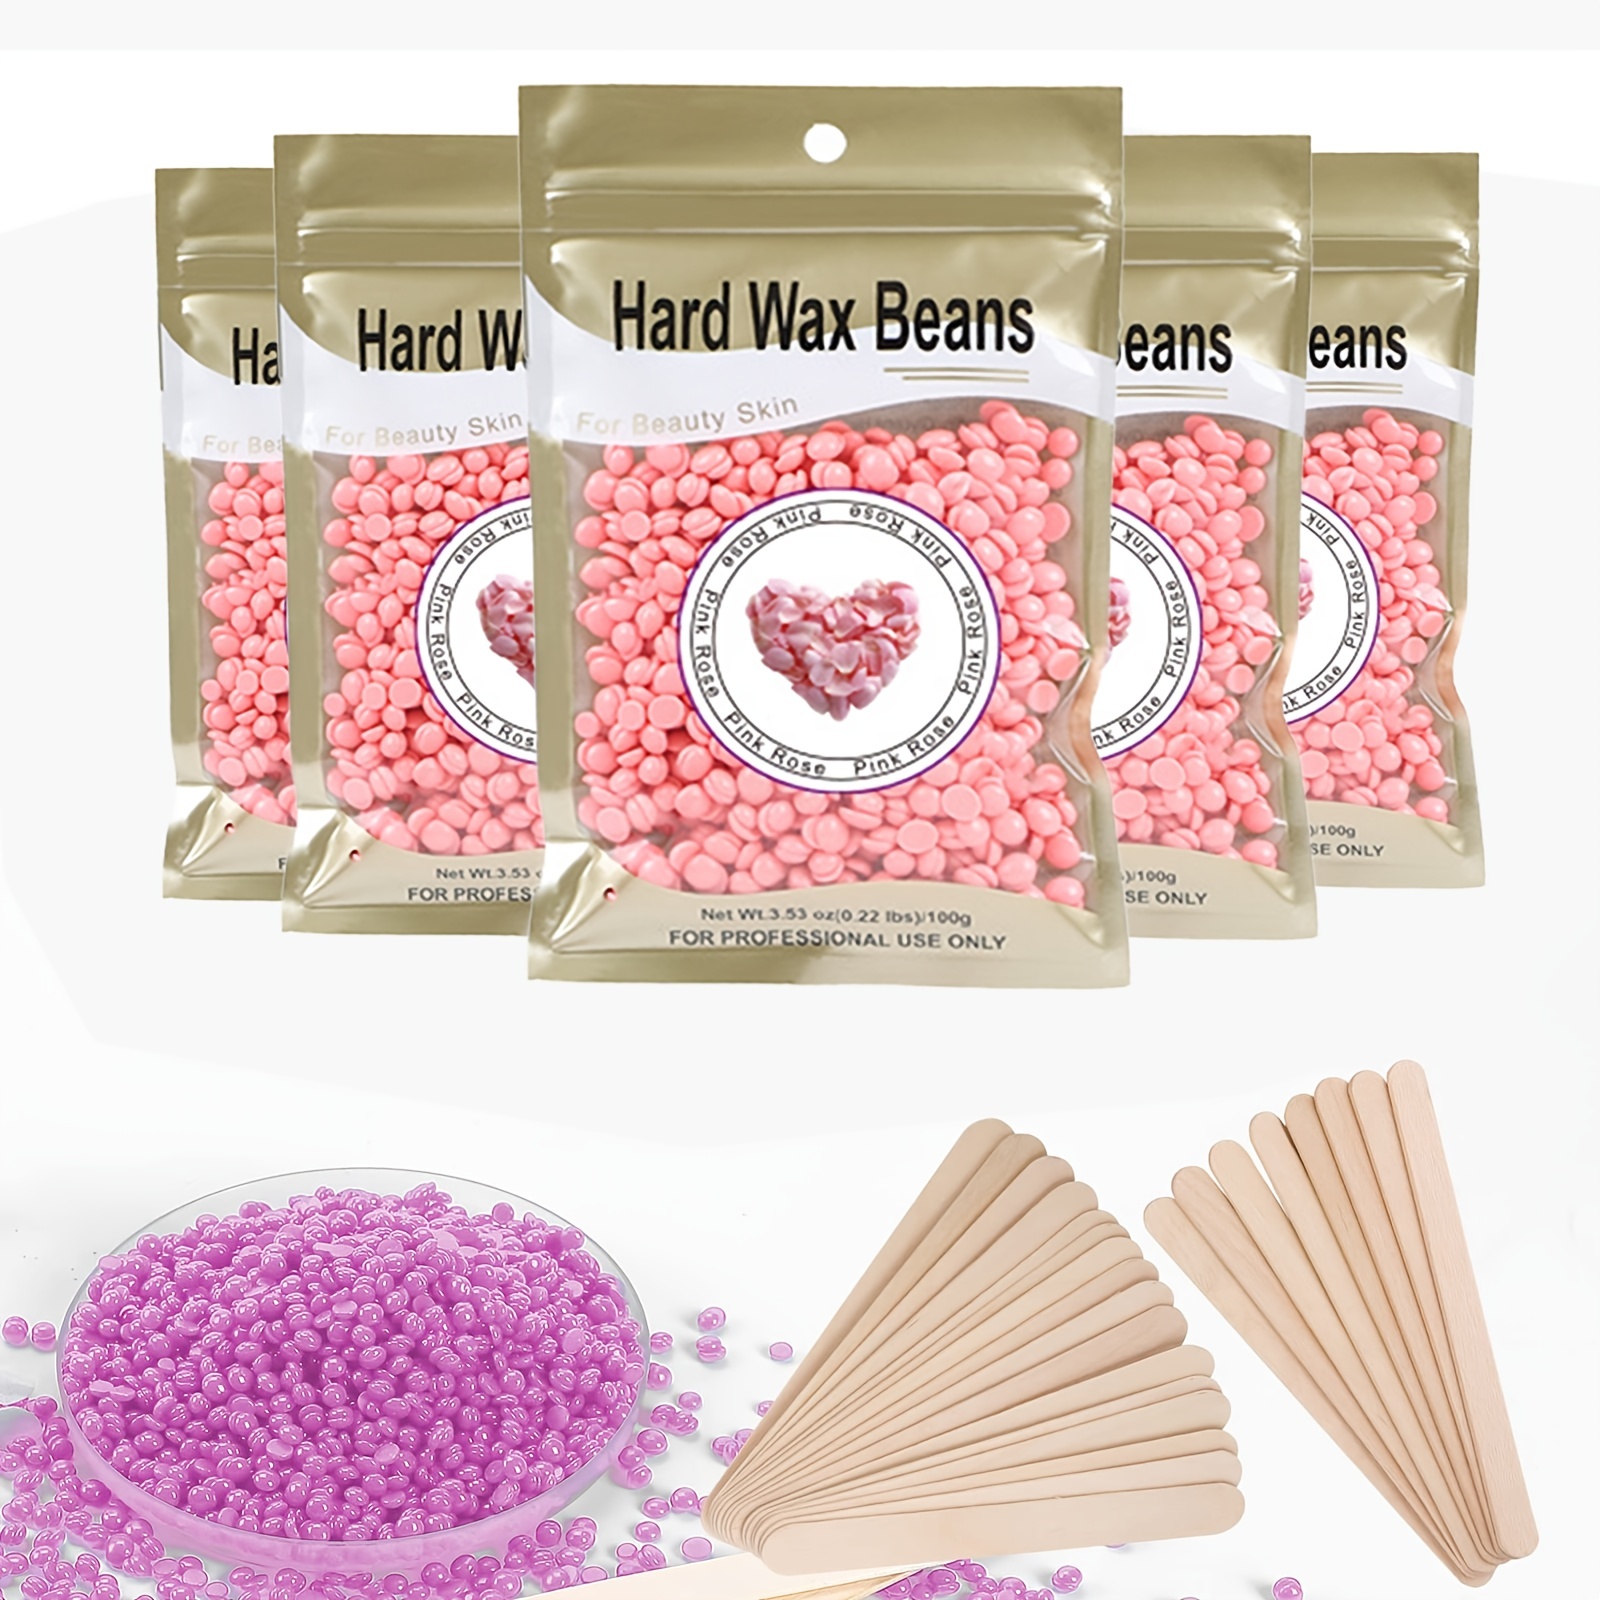 Hard Wax Beads for Hair Removal, Yovanpur Wax Beads for Brazilian Waxing,  Waxing Beans for Sensitive Skin, Face Eyebrow Back Chest Legs At Home Pearl Wax  Beads, 300g (10 Oz)/bag with 10pcs